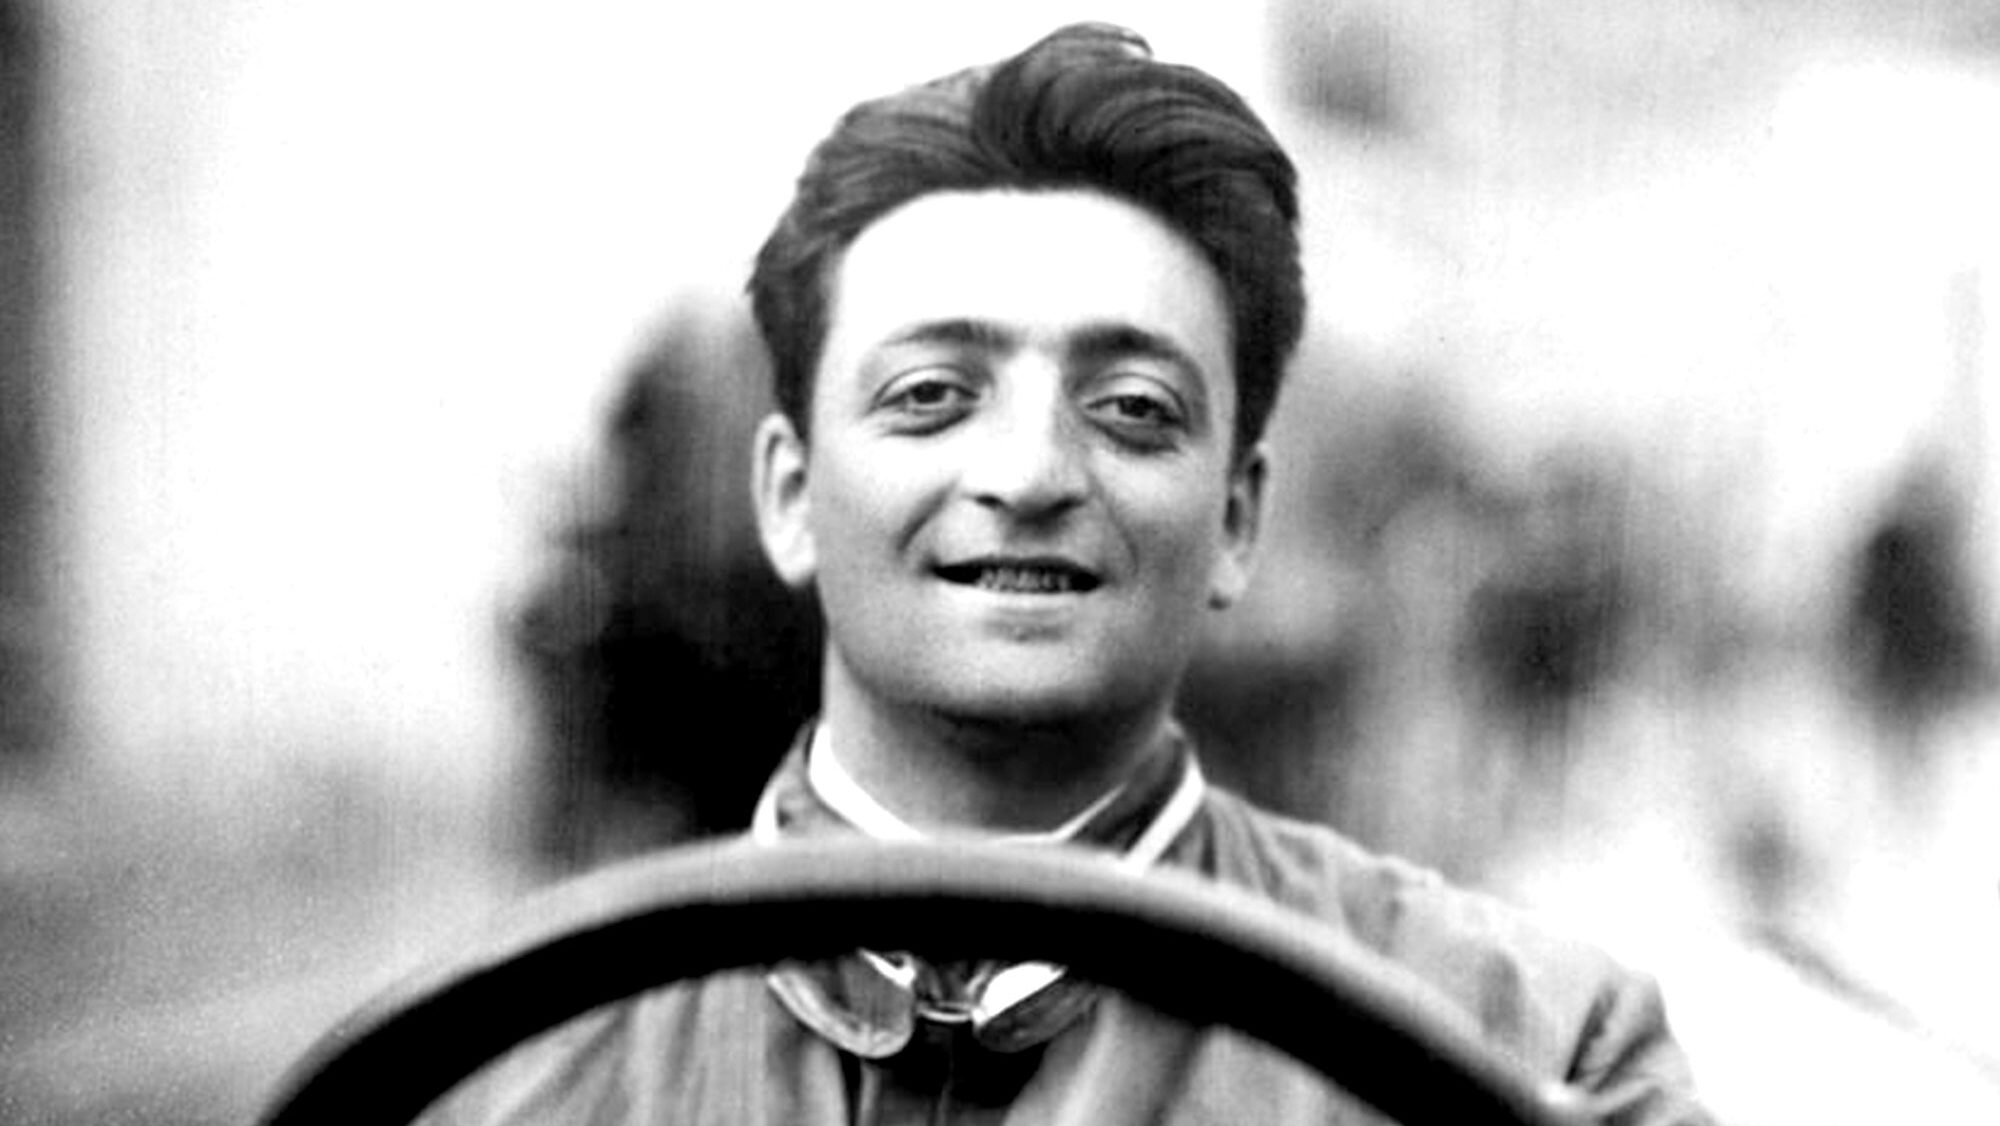 35 years after his demise, Enzo Ferrari set for comeback with Adam ...